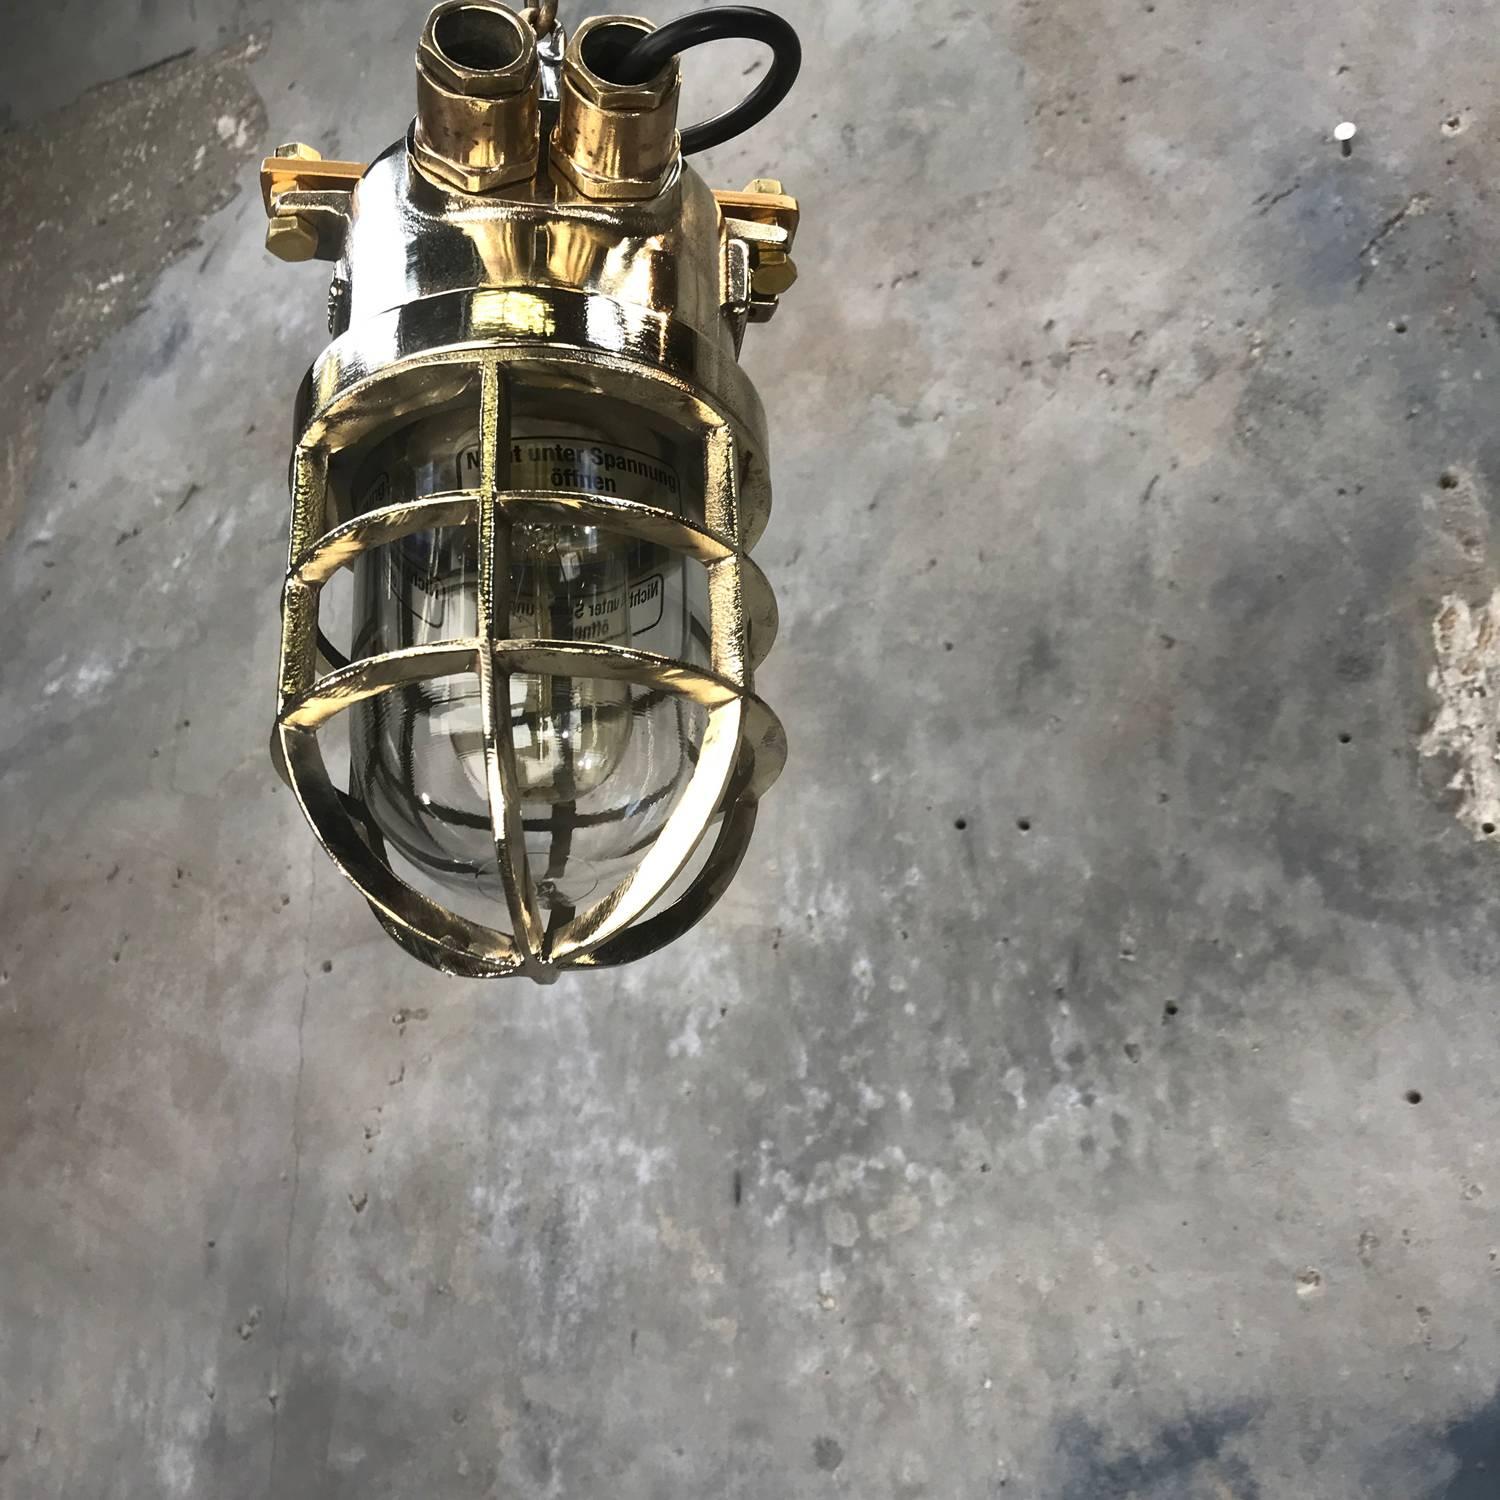 Late Century German Cast Brass and Glass Shade Explosion Proof Pendant Light For Sale 2